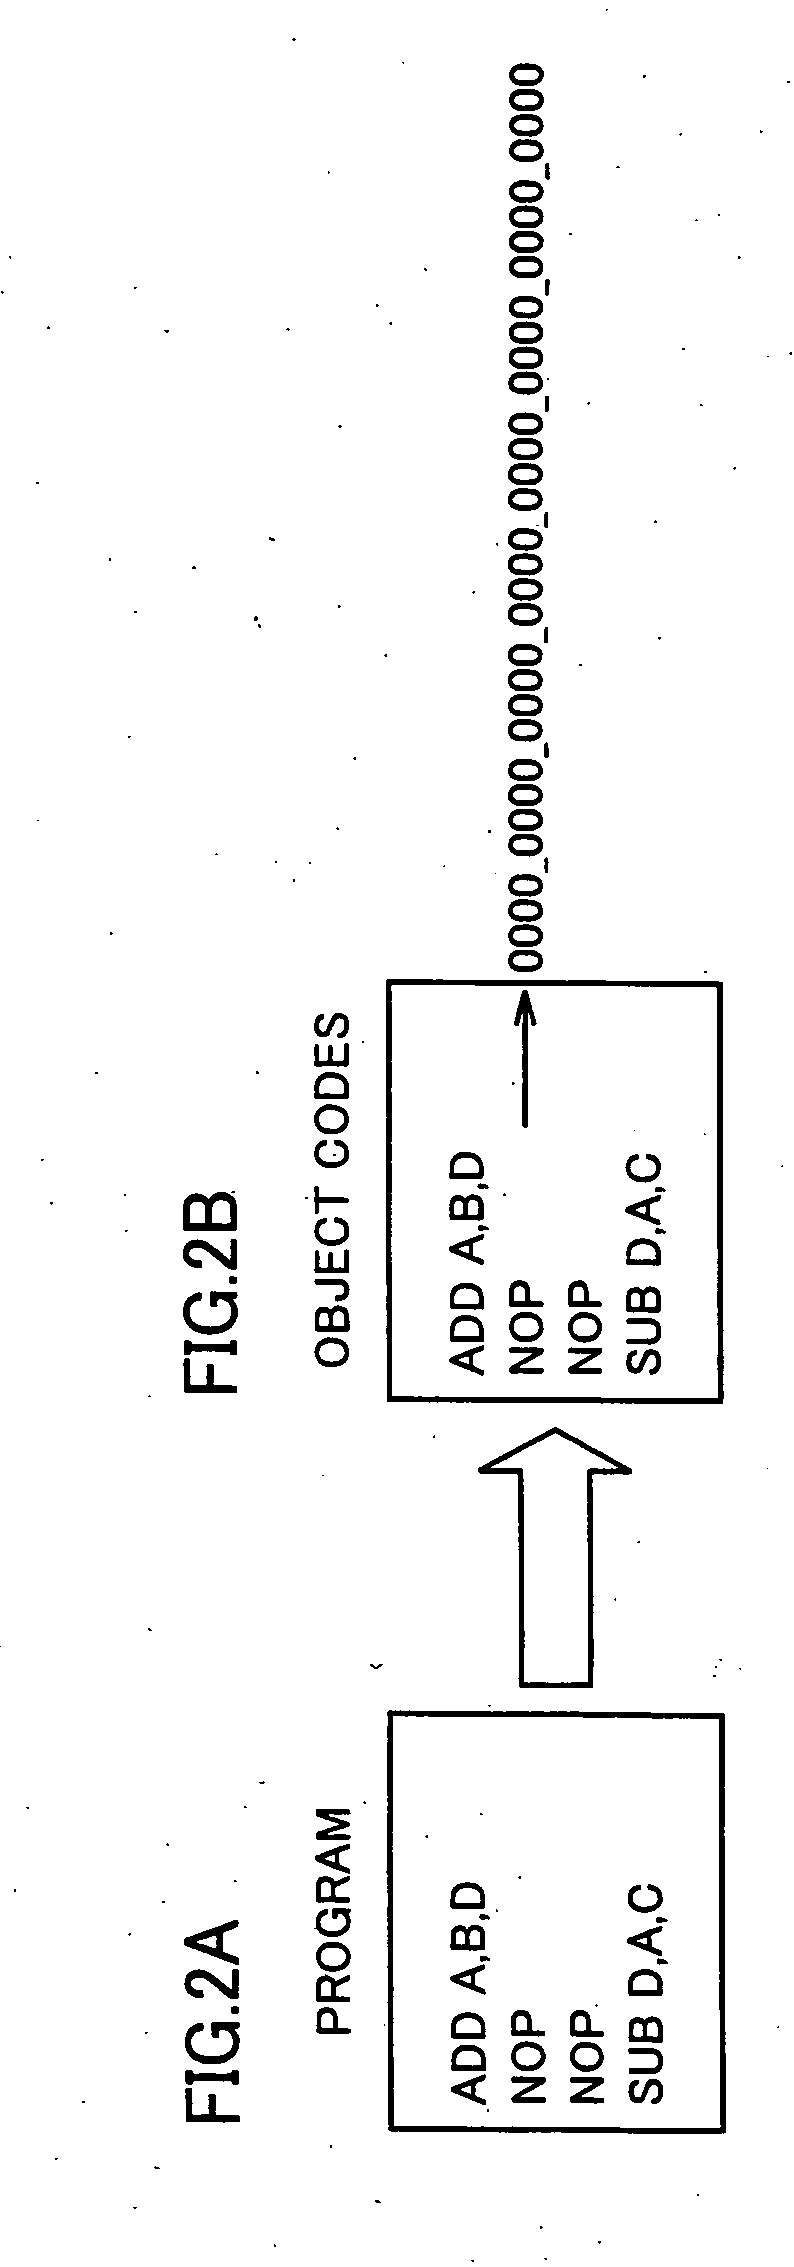 Assembler capable of reducing size of object code, and processor for executing the object code